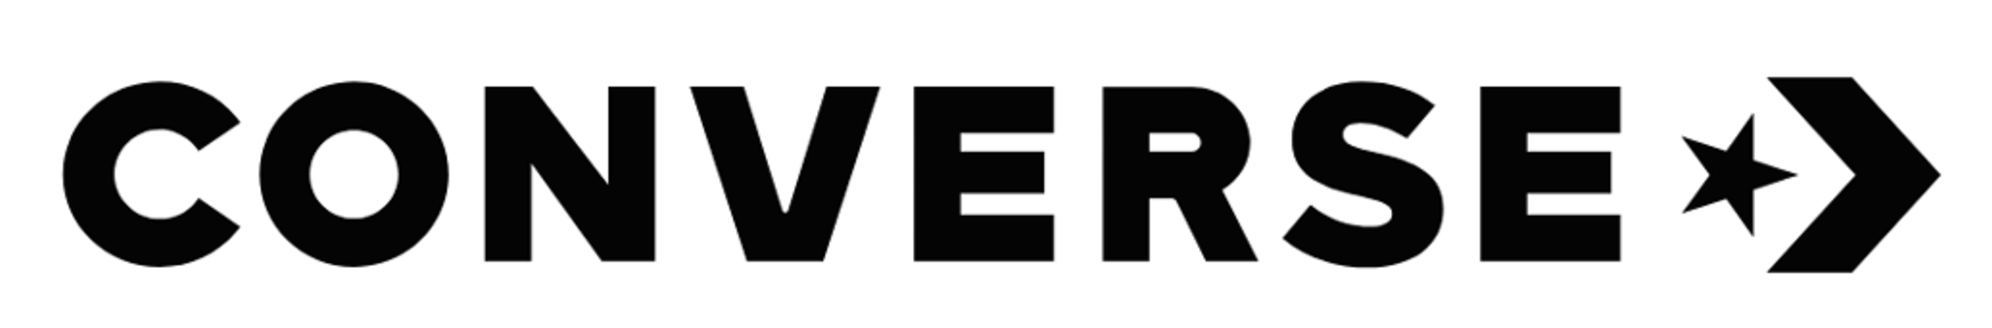 New Logo for Converse